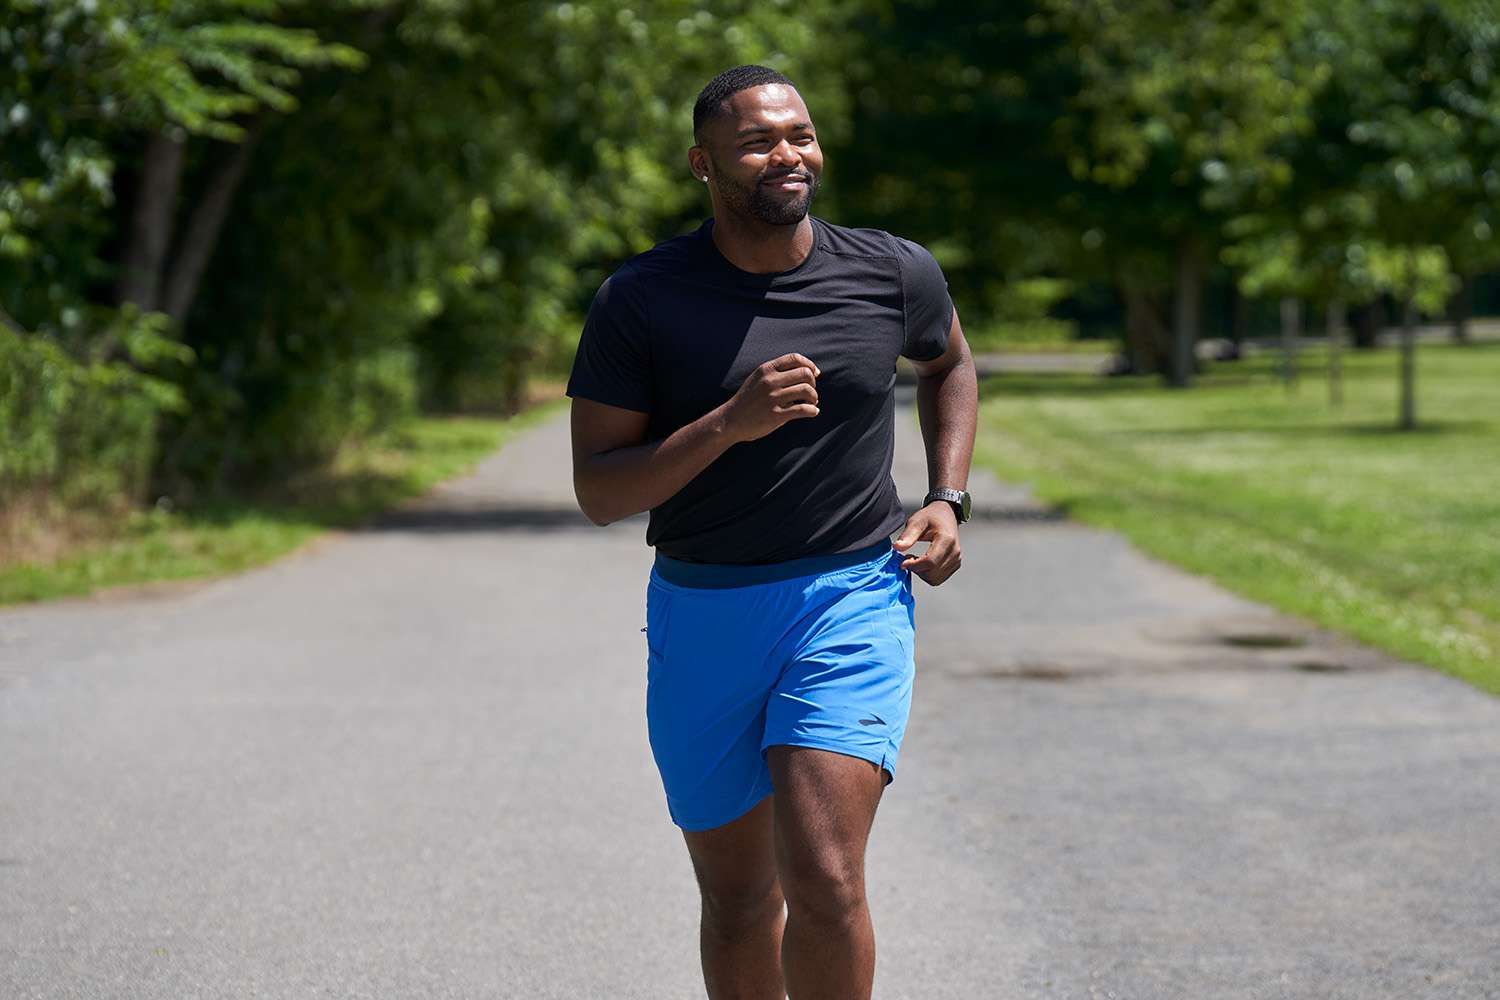 is running good for weight loss?